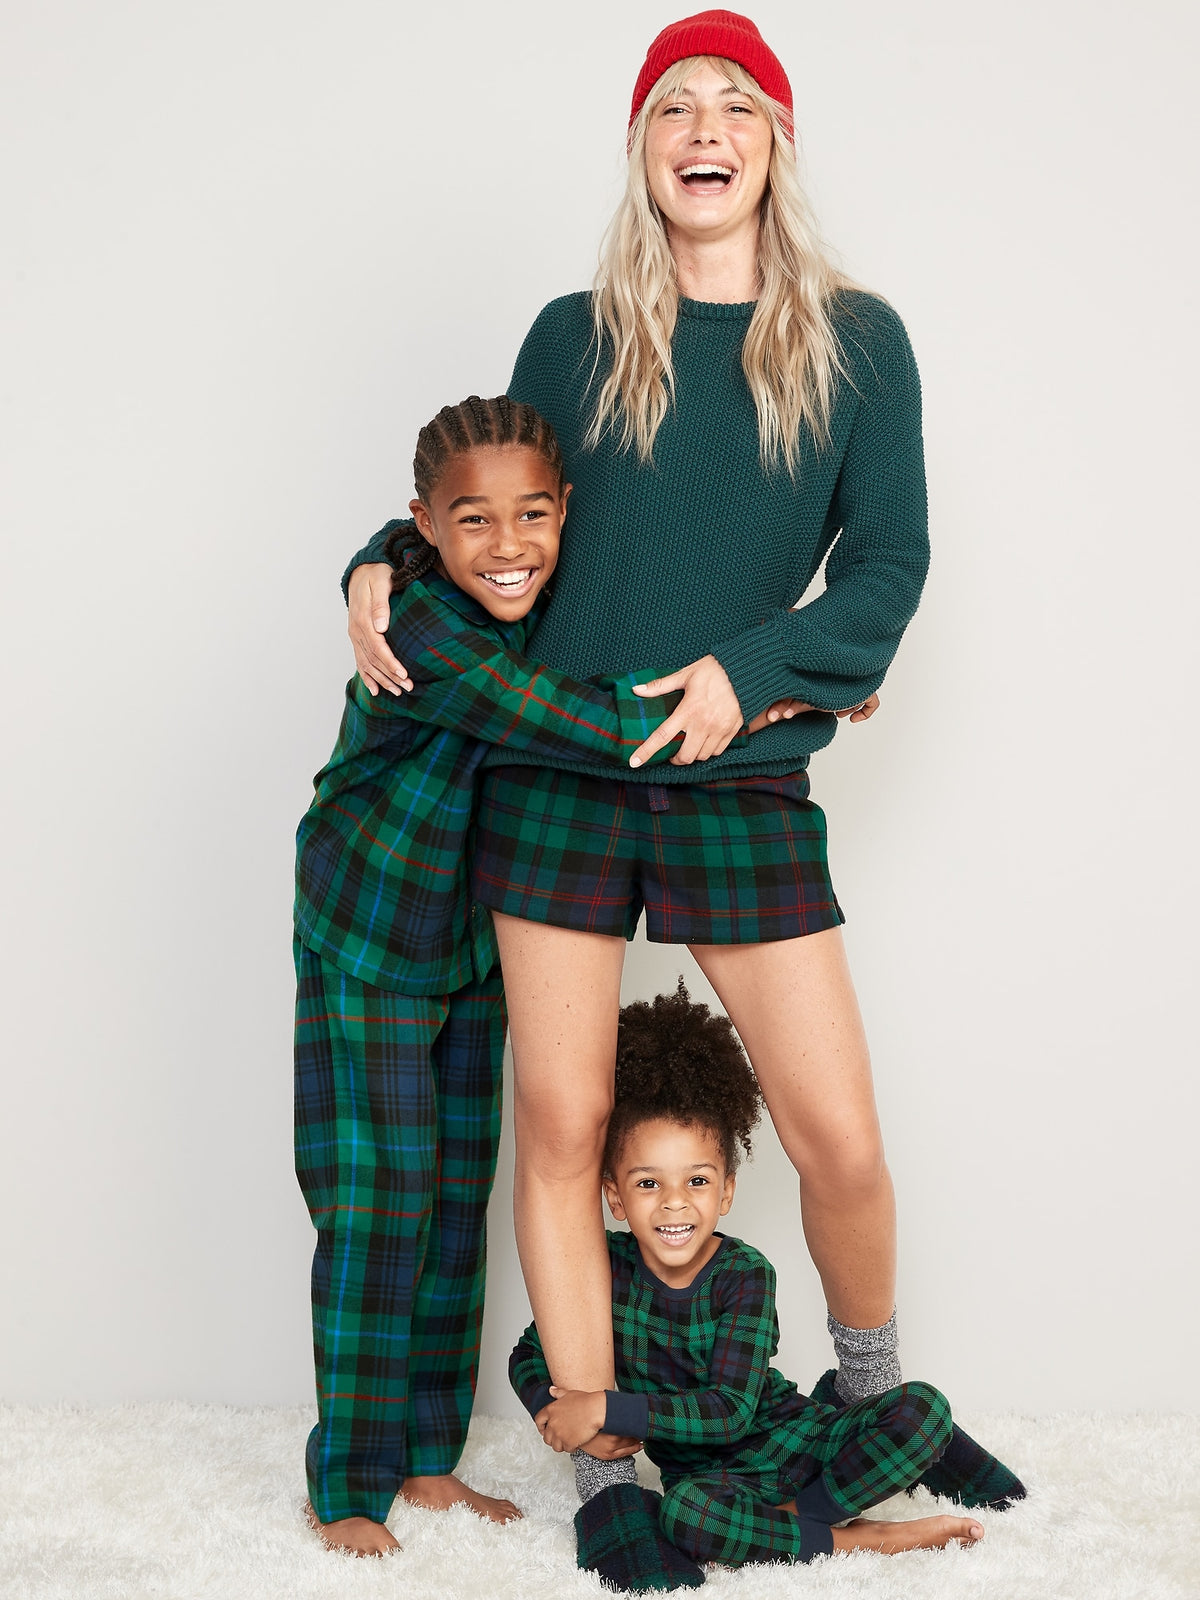 Gender-Neutral Matching Flannel Pajama Set for Kids - Old Navy Philippines